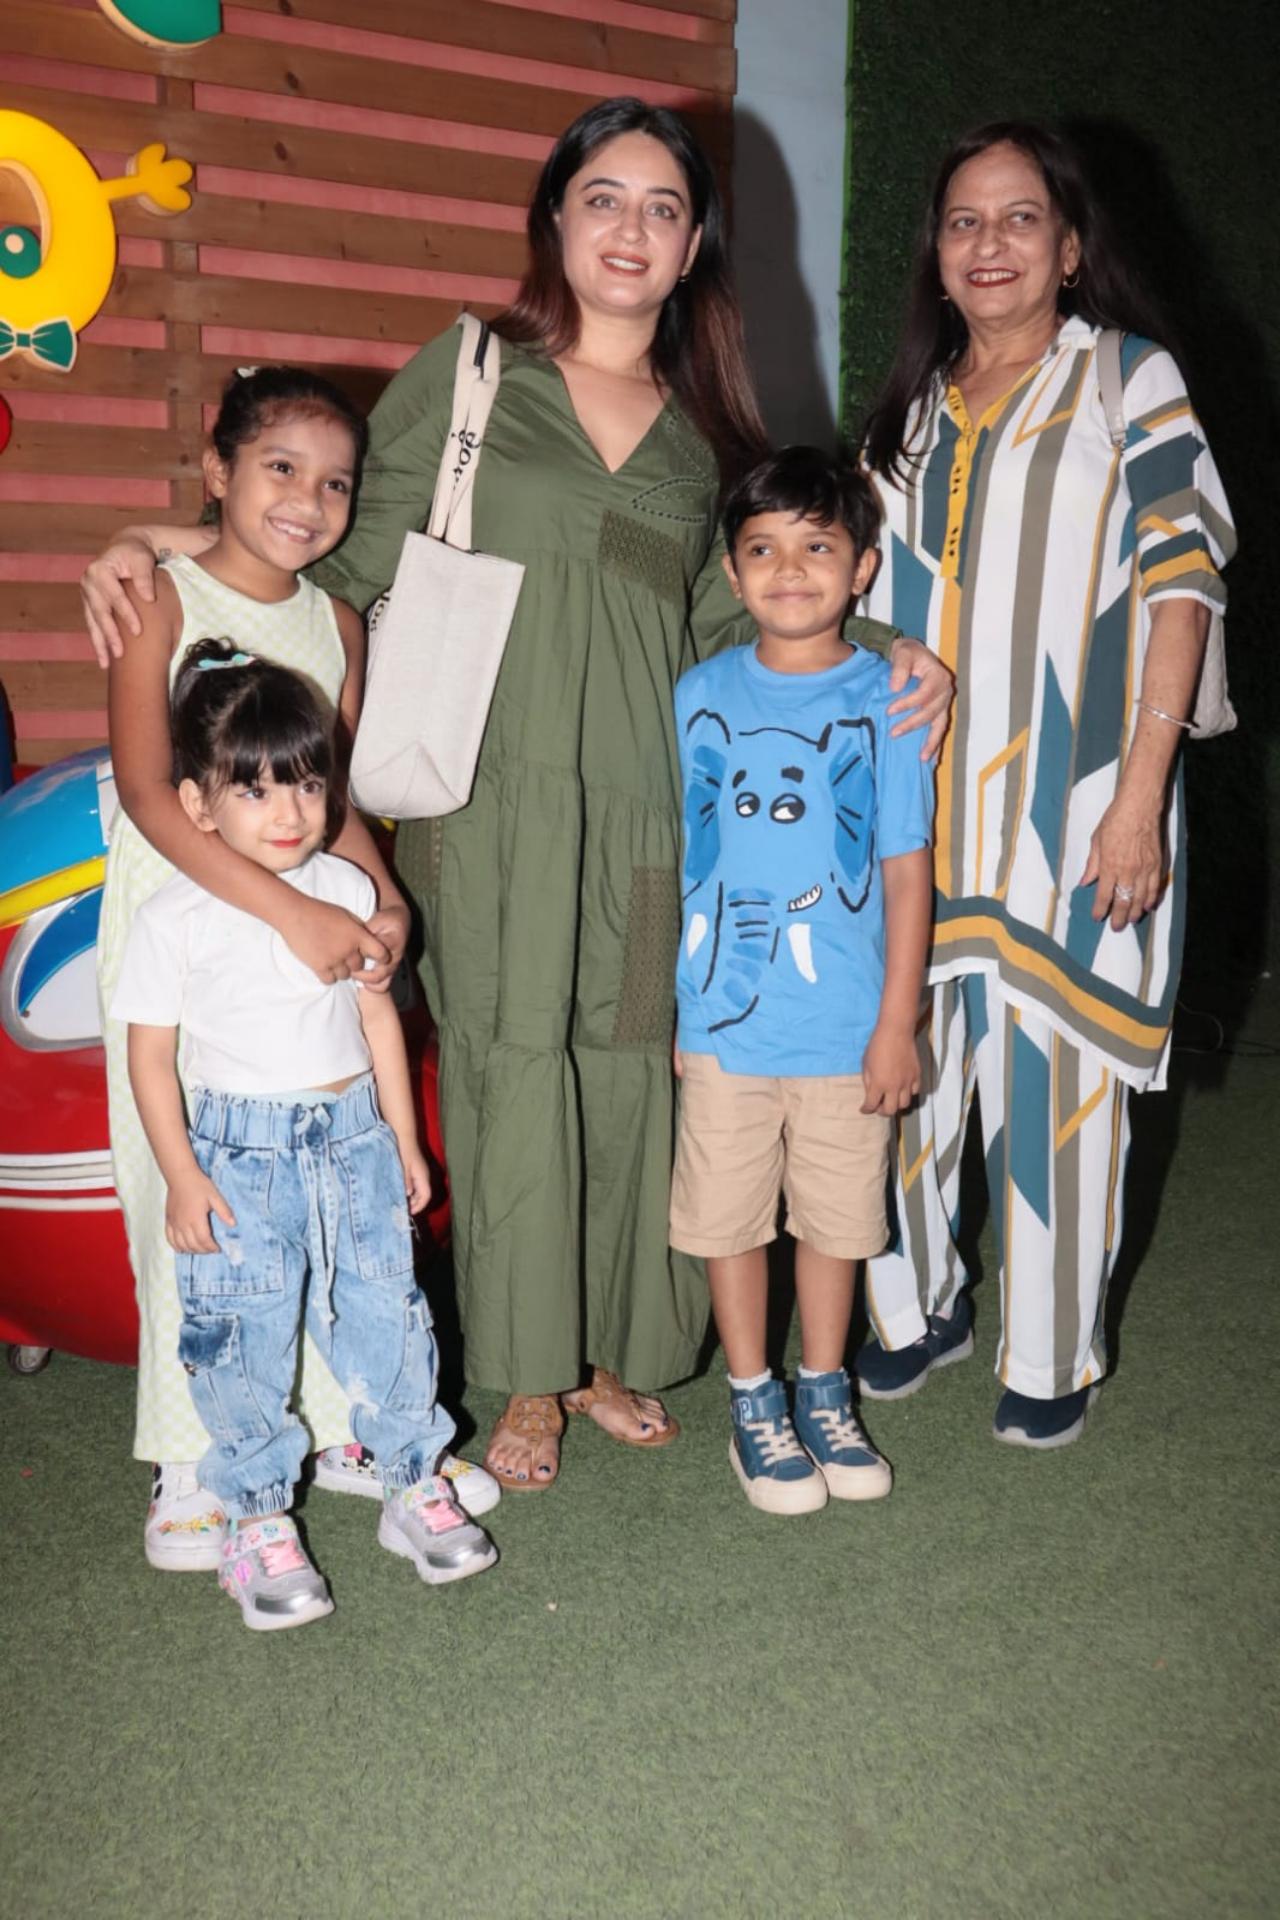 Bollywood actress Mahi Vij marked her presence at the birthday party with her kids.